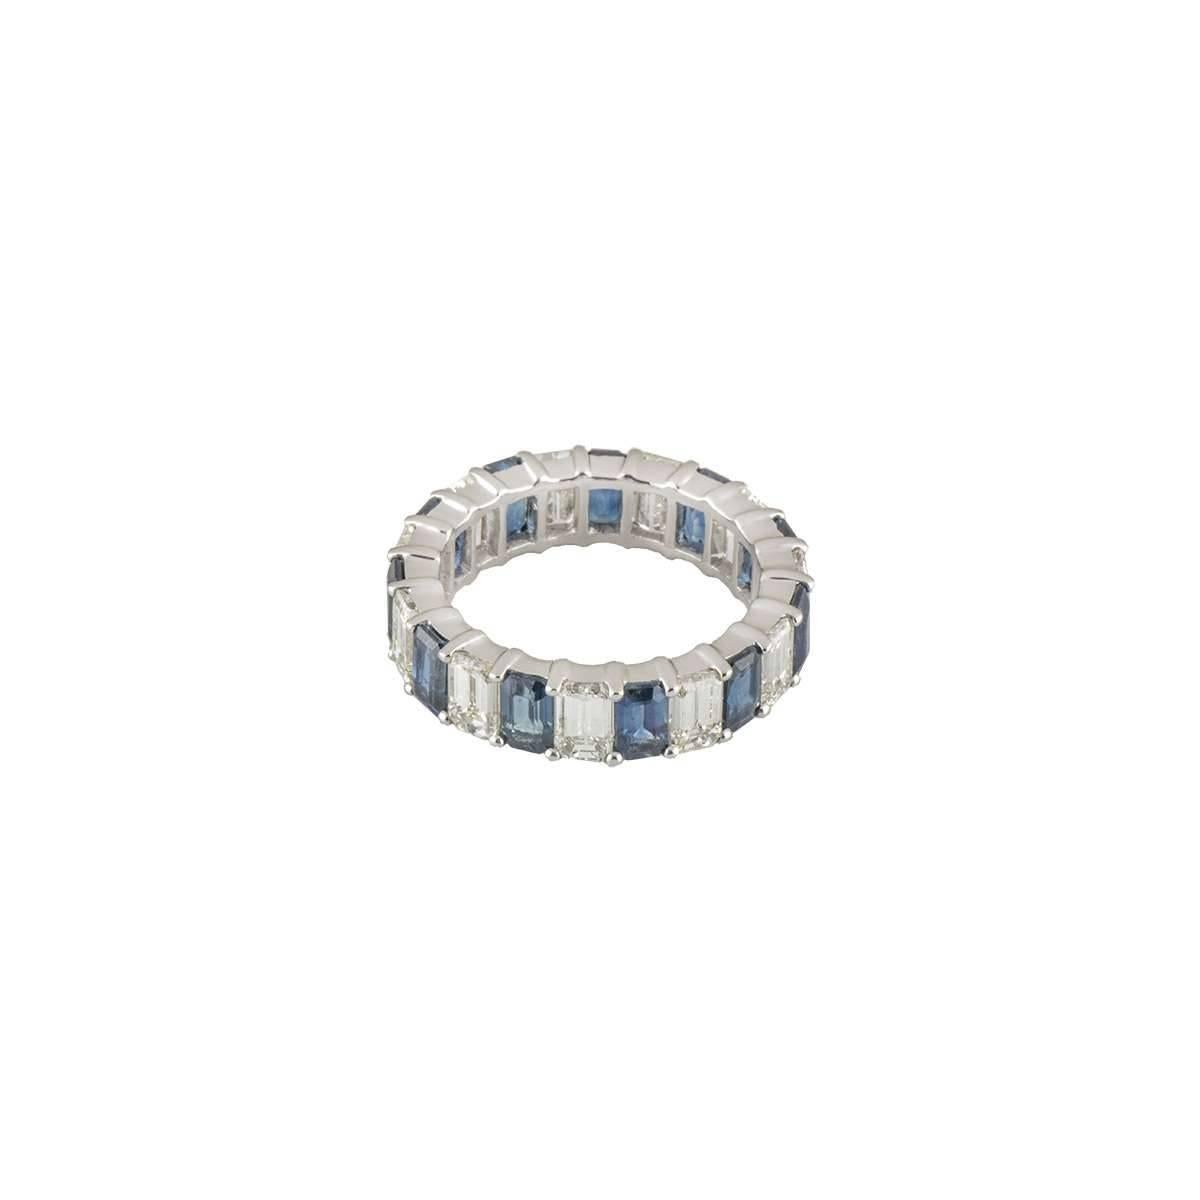 An exquisite 18k white gold diamond and sapphire full eternity ring. The ring consists of claw set baguette cut diamonds, alternating with baguette cut blue sapphires, each totalling approximately 4.40ct. The ring is a US size 6 1/2, EU size 53.5